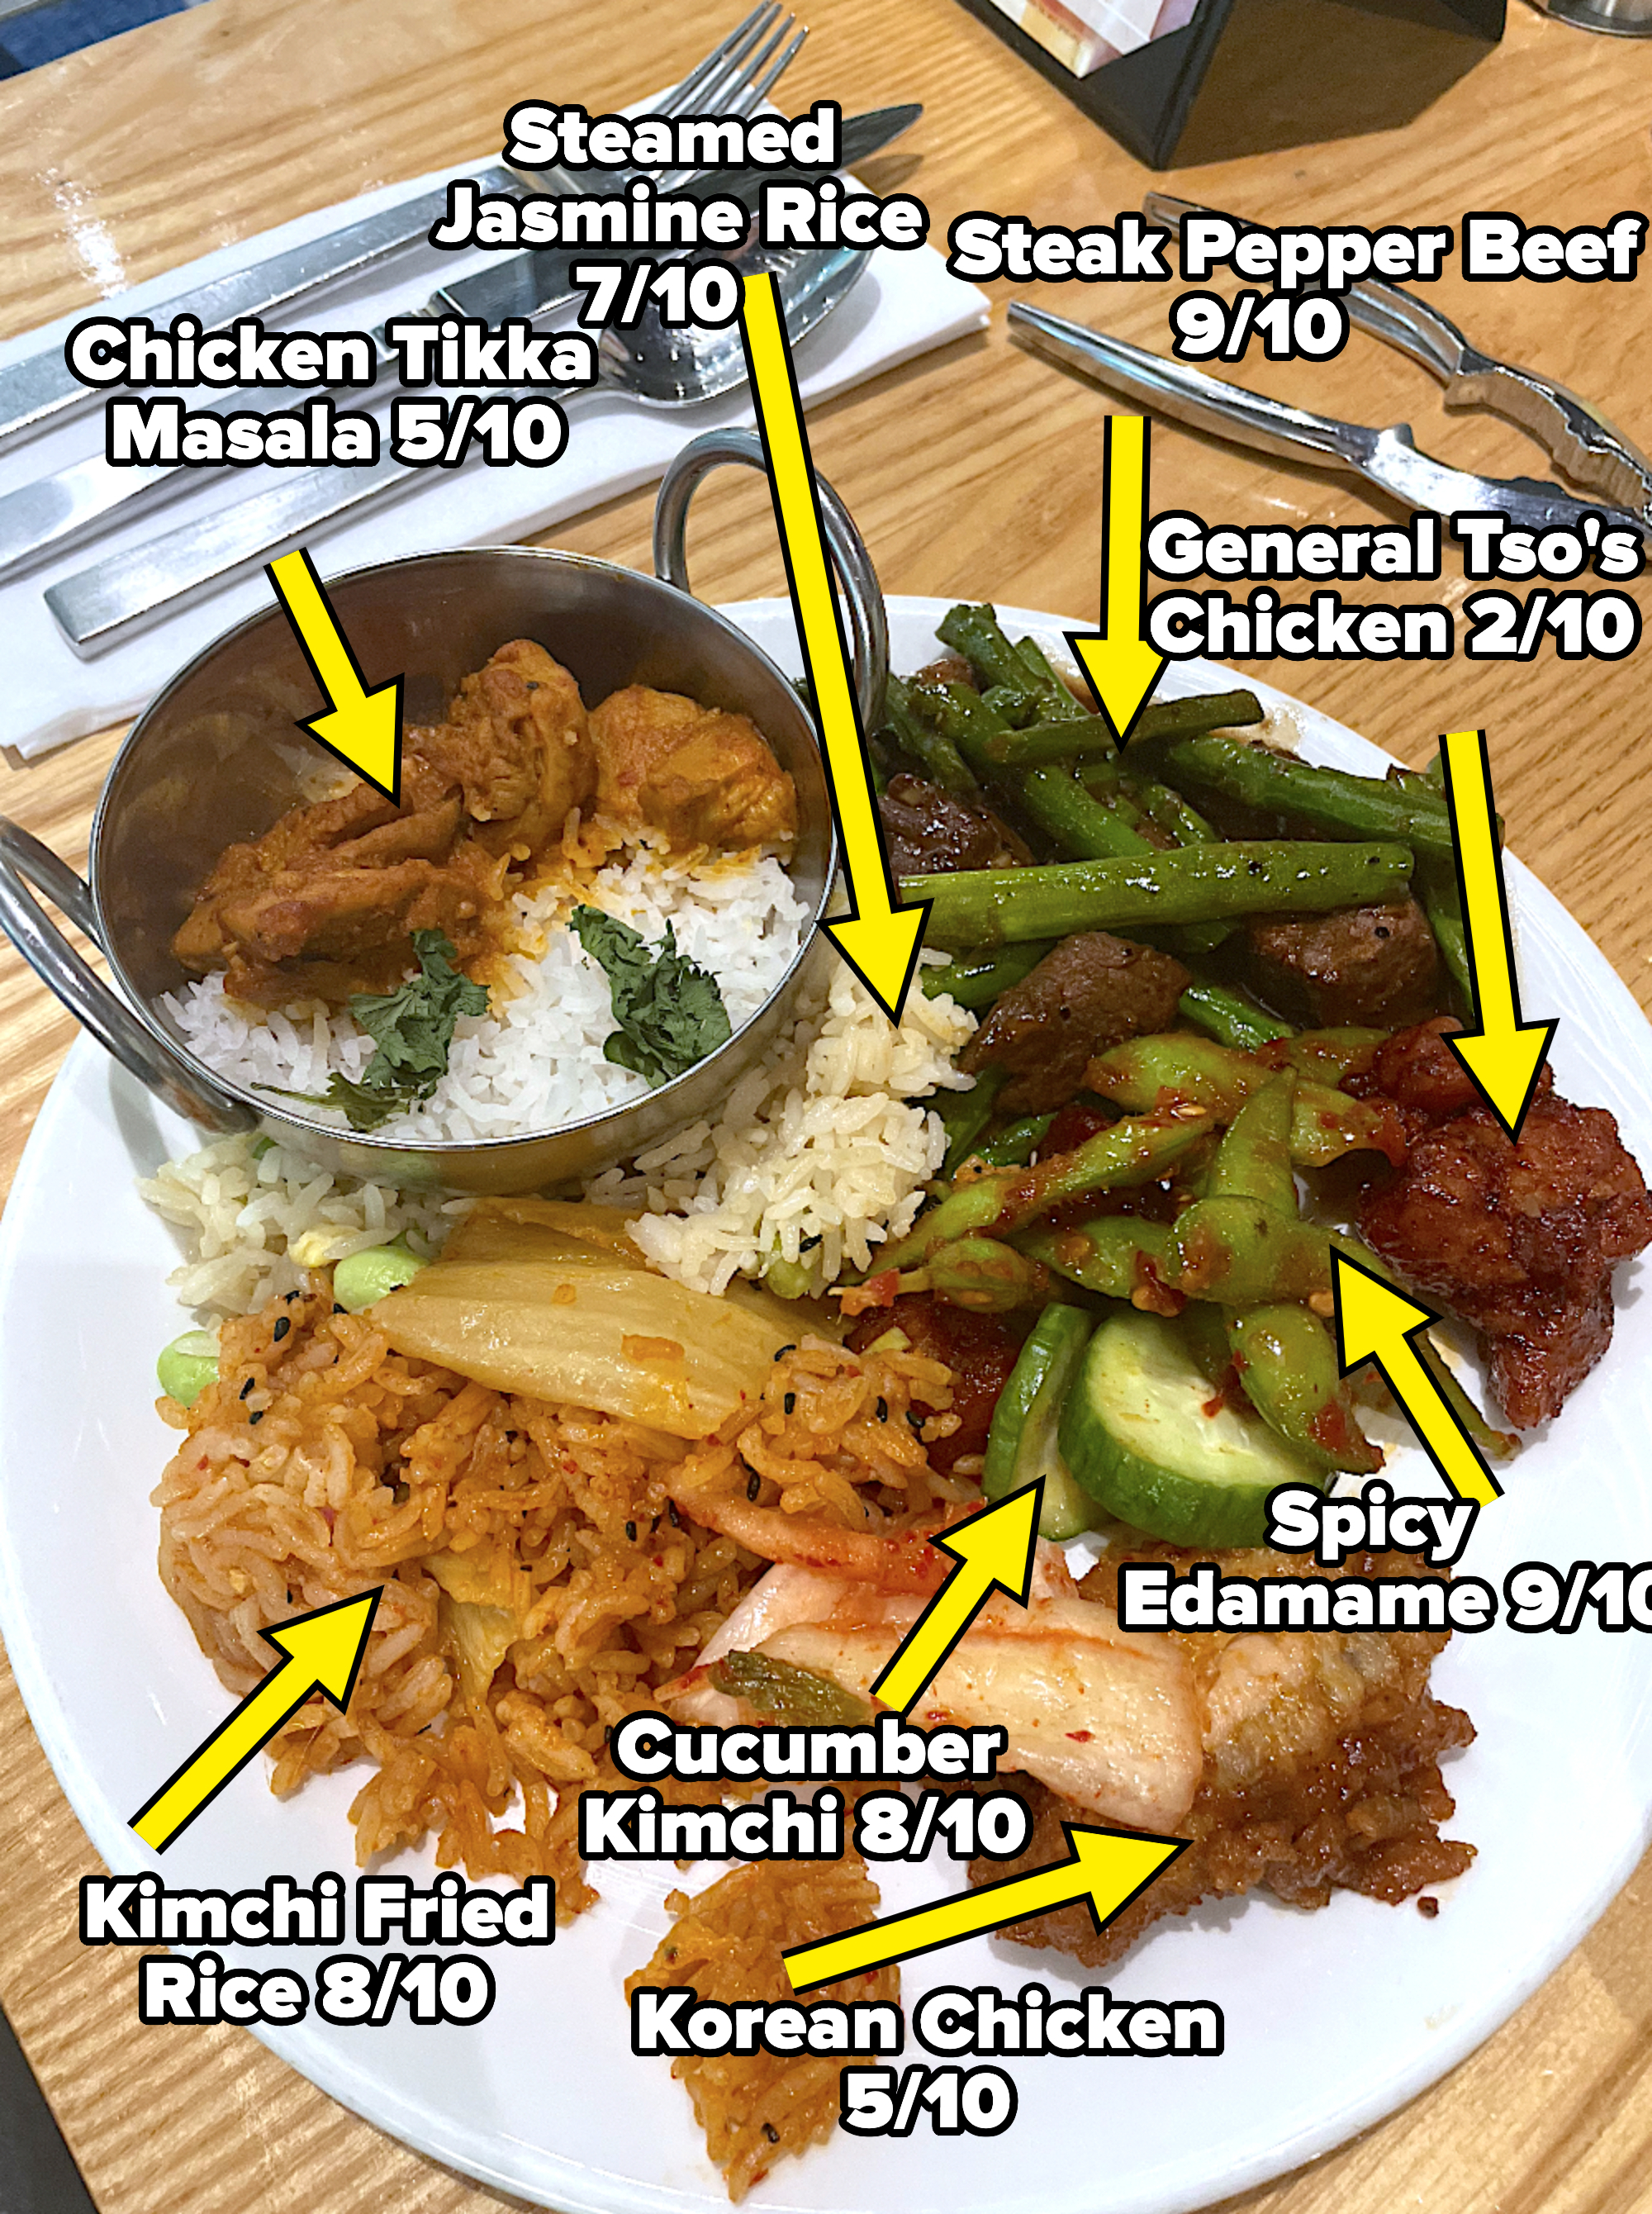 A plate full of food, with arrows point to each item and giving it a rating out of 10; the lowest rating is a 2, the highest is a 9